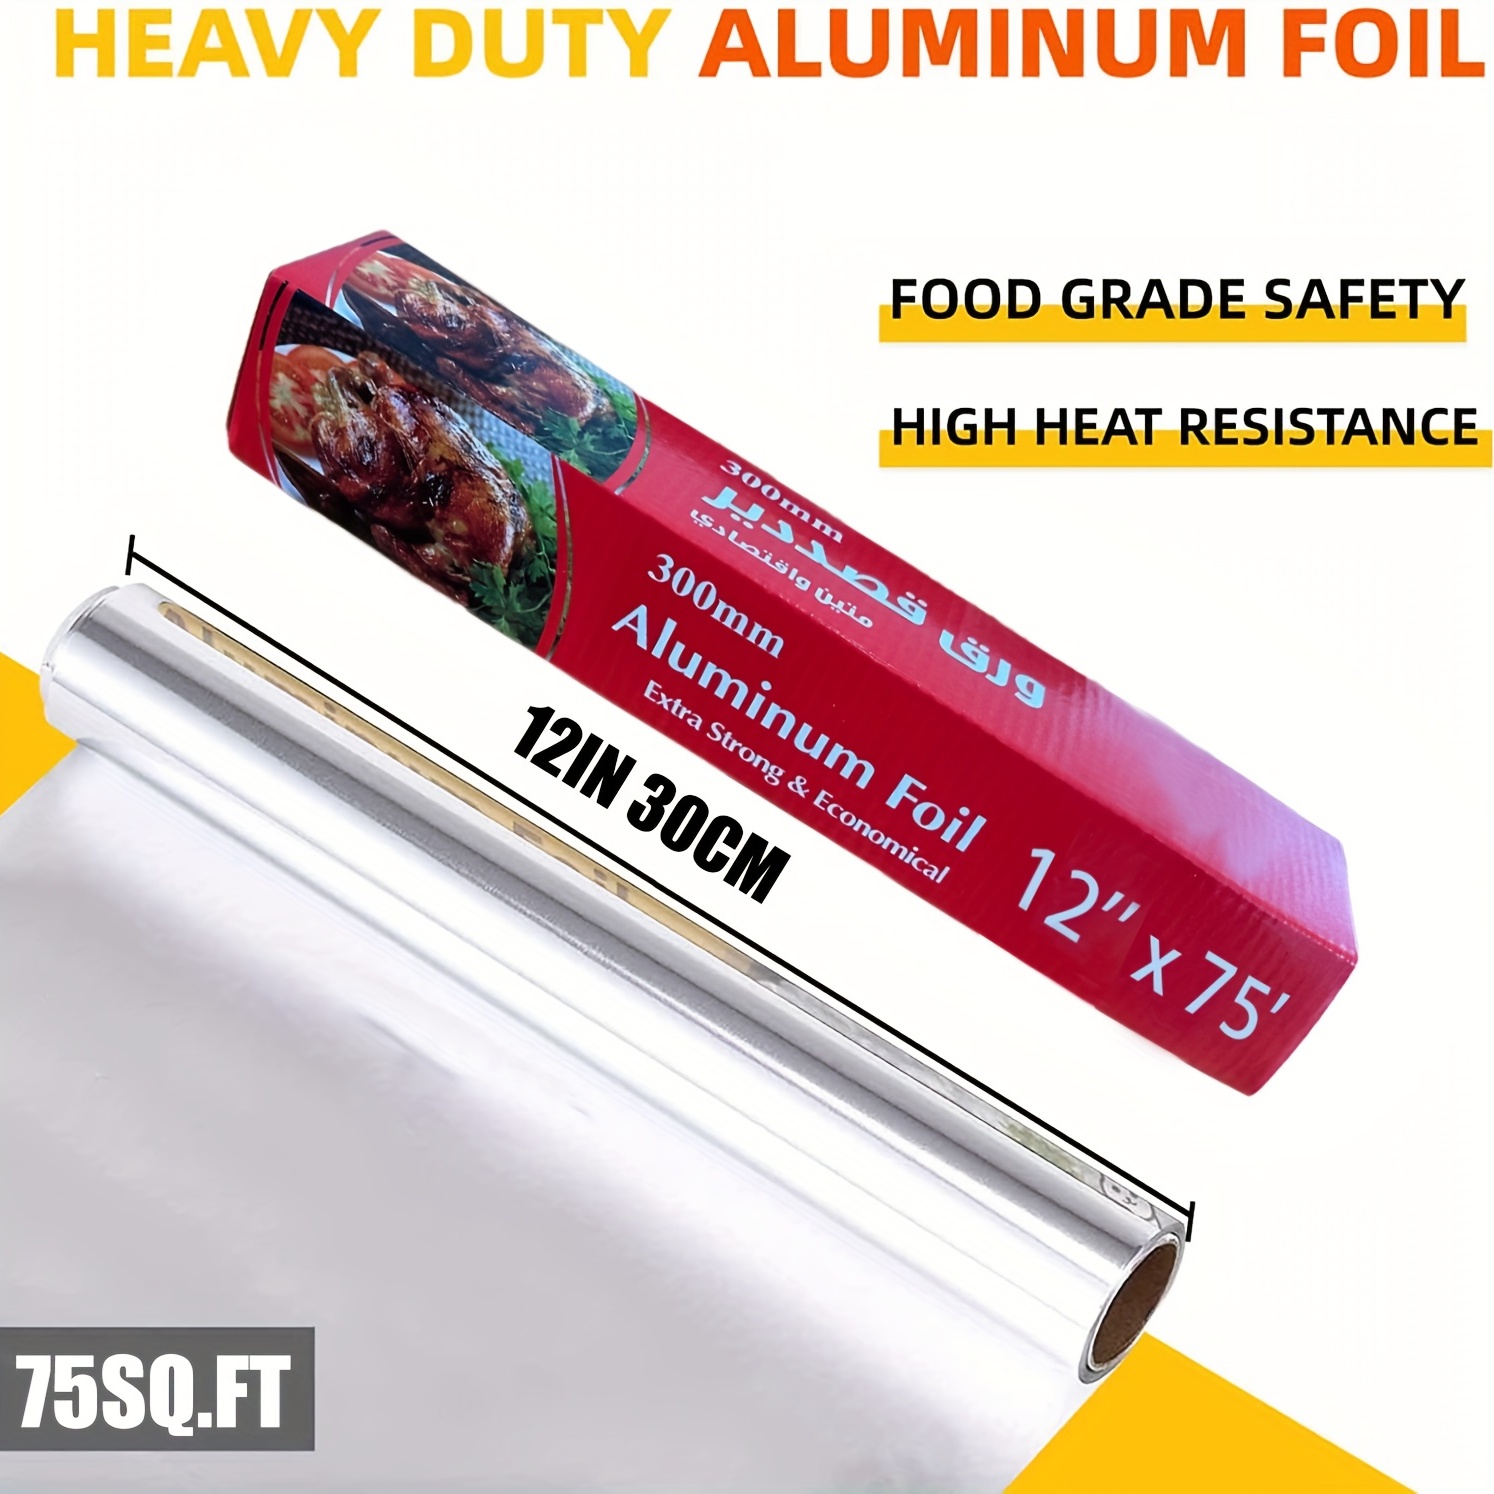 Aluminum Foil Roll 12 Inch Wide 32 Sqft, 20 Micron Thick Heavy Duty Foil  Aluminum Roll For BBQ, Catering, Grilling, Roasting, Baking, Cooking,  Aluminum Foil, 12 X 32 Sqft